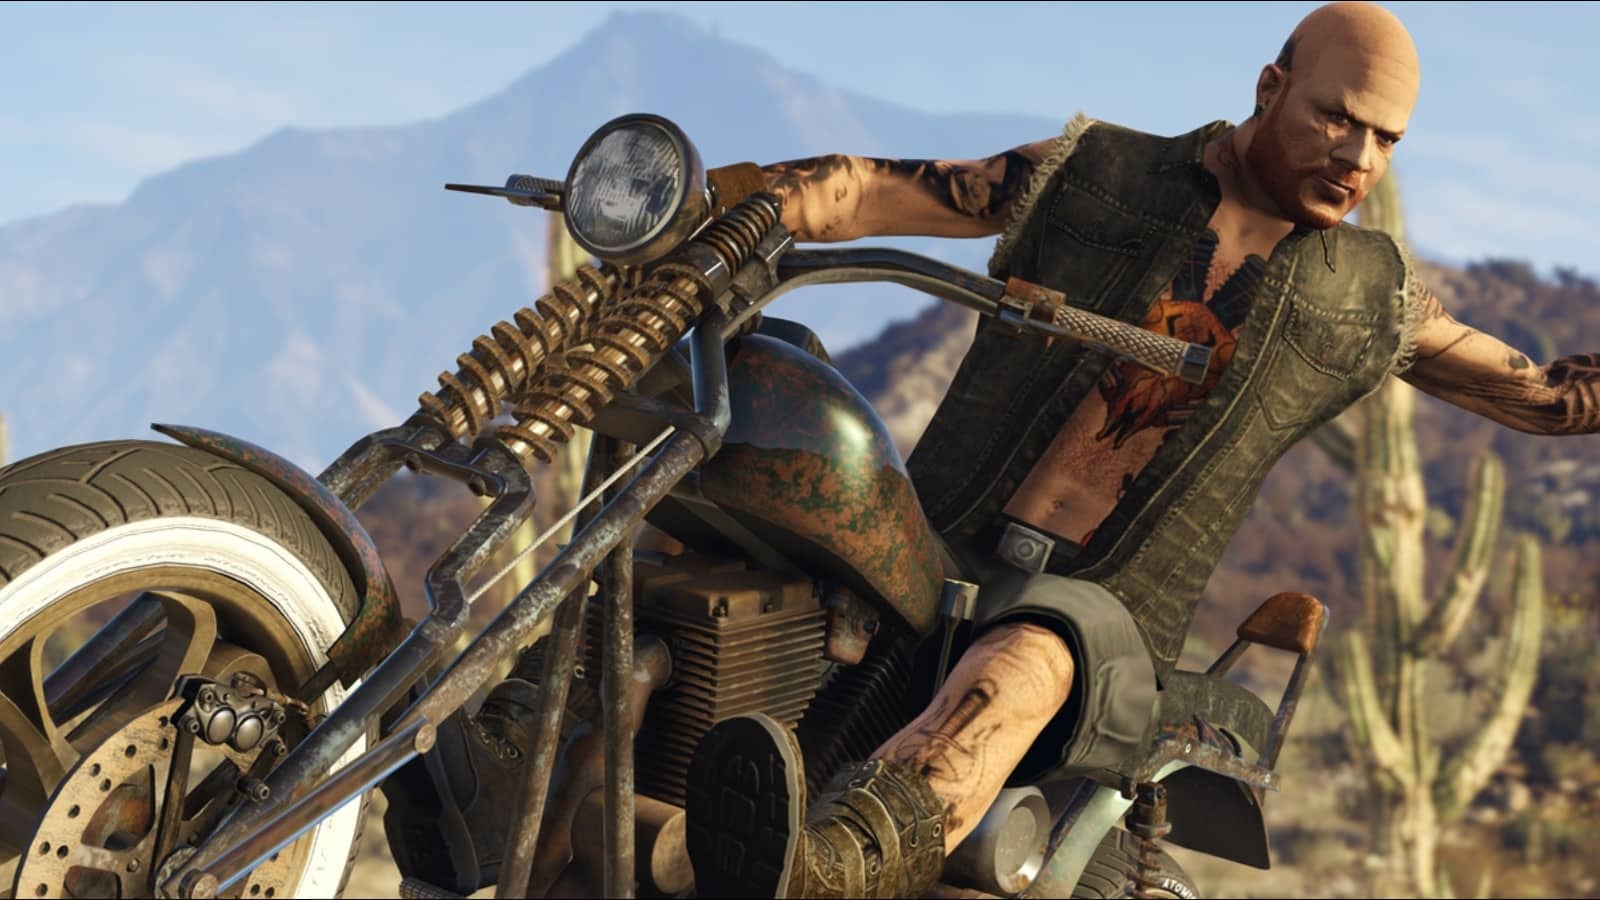 GTA Online players find perfect 2-man bike for future update